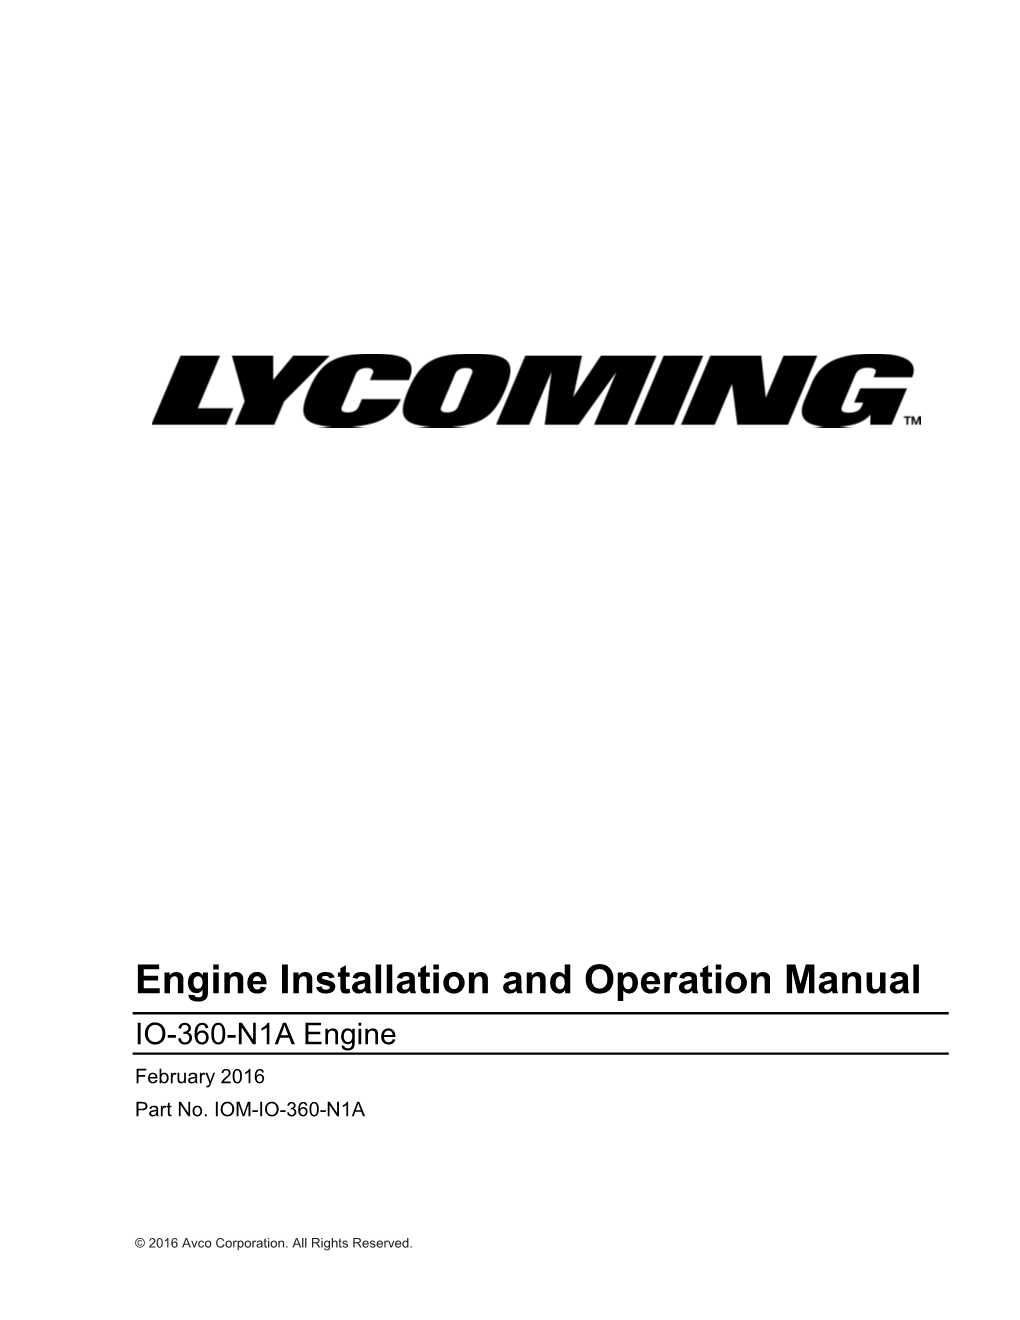 Engine Installation and Operation Manual IO-360-N1A Engine February 2016 Part No